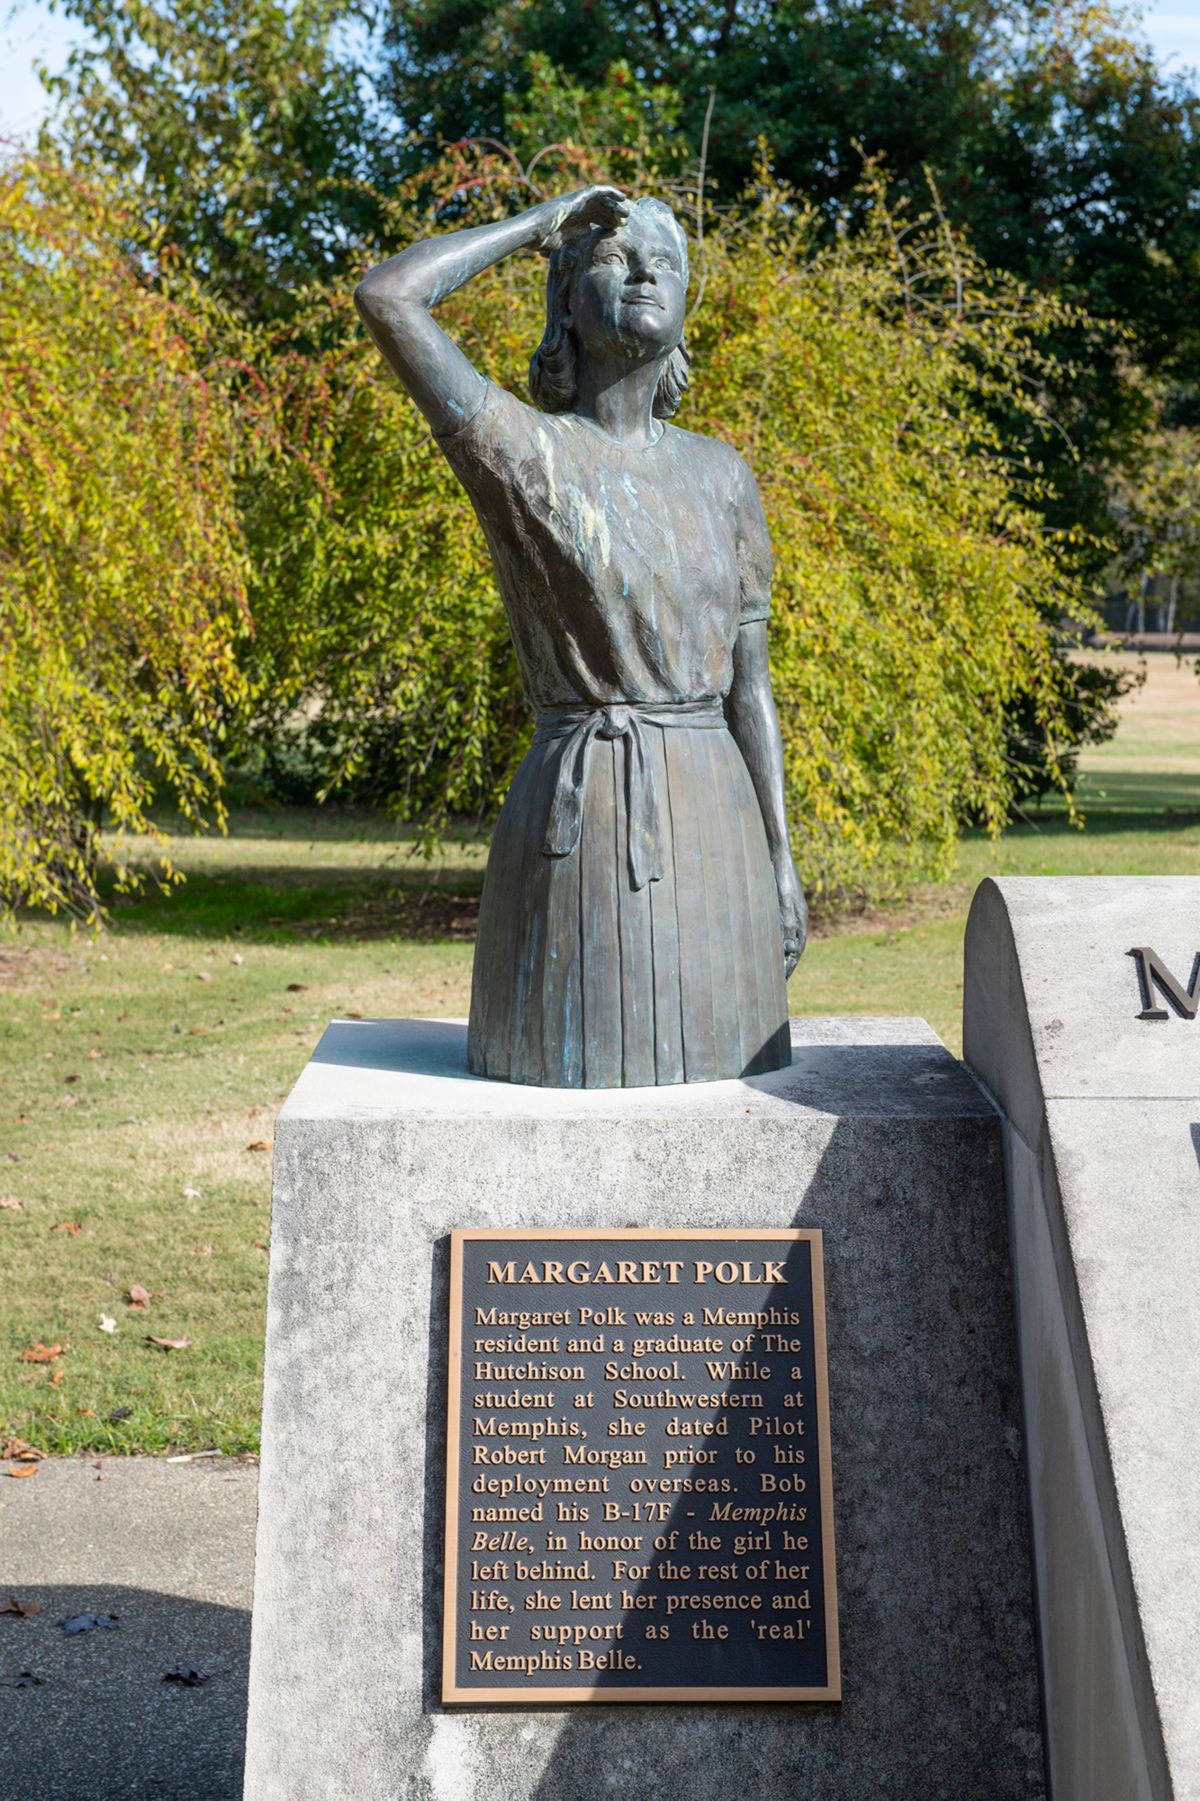 Statue of a woman looking towards the sky, labeled Margaret Polk.